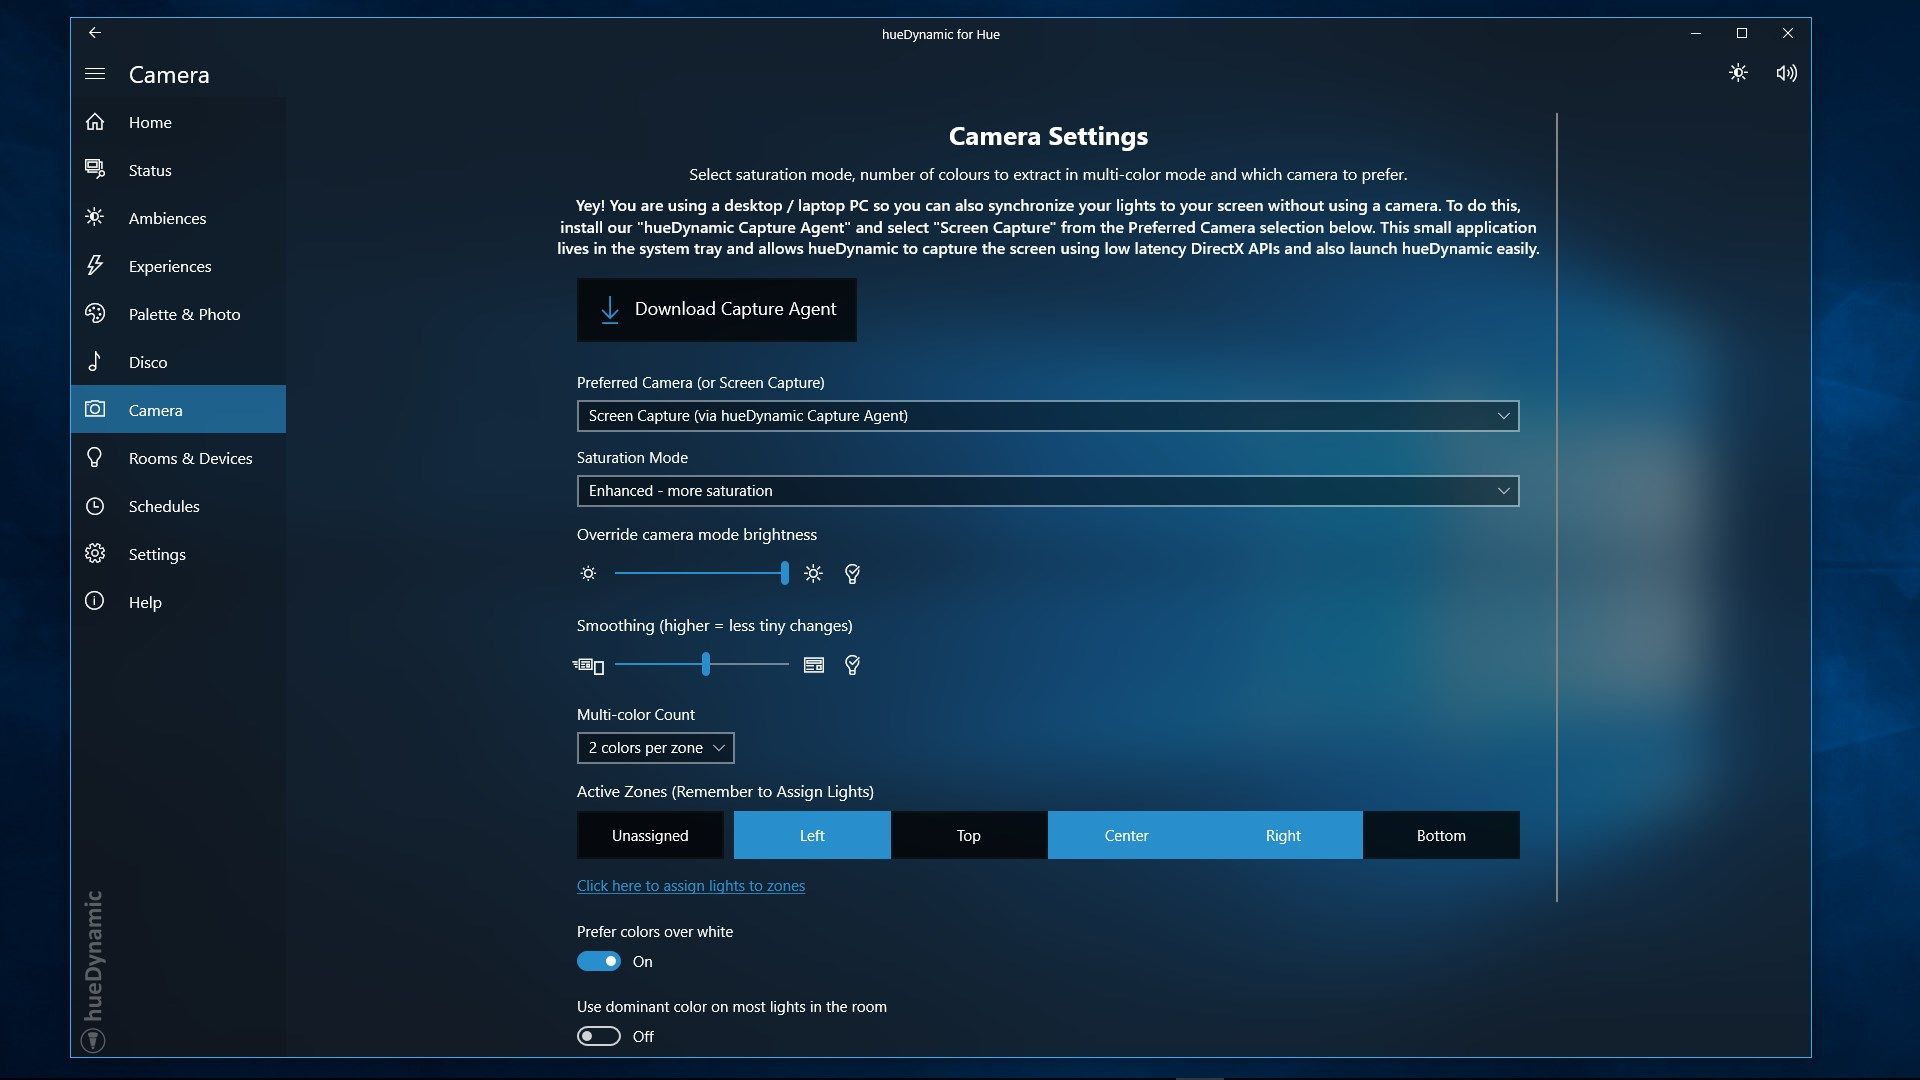 Immersive camera support. Sync lights to your PC screen using the lowest latency app available. We use DirectX and hardware acceleration to push Hue to the limit! Want to sync with your TV? No problem, we support web cams too!